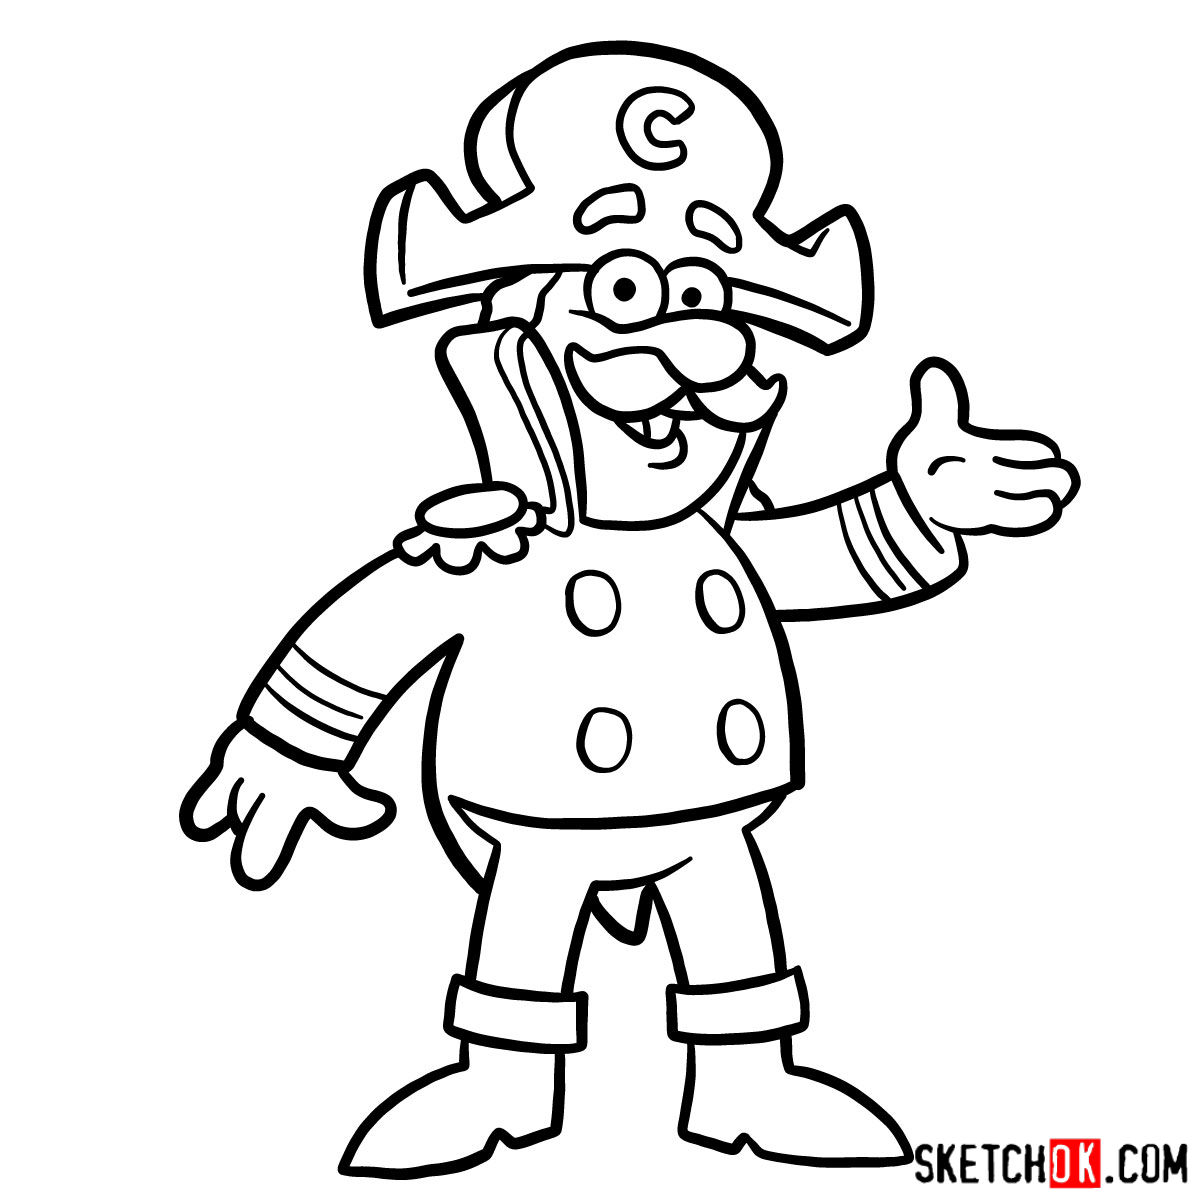 How to draw Cap'n Crunch - step 12